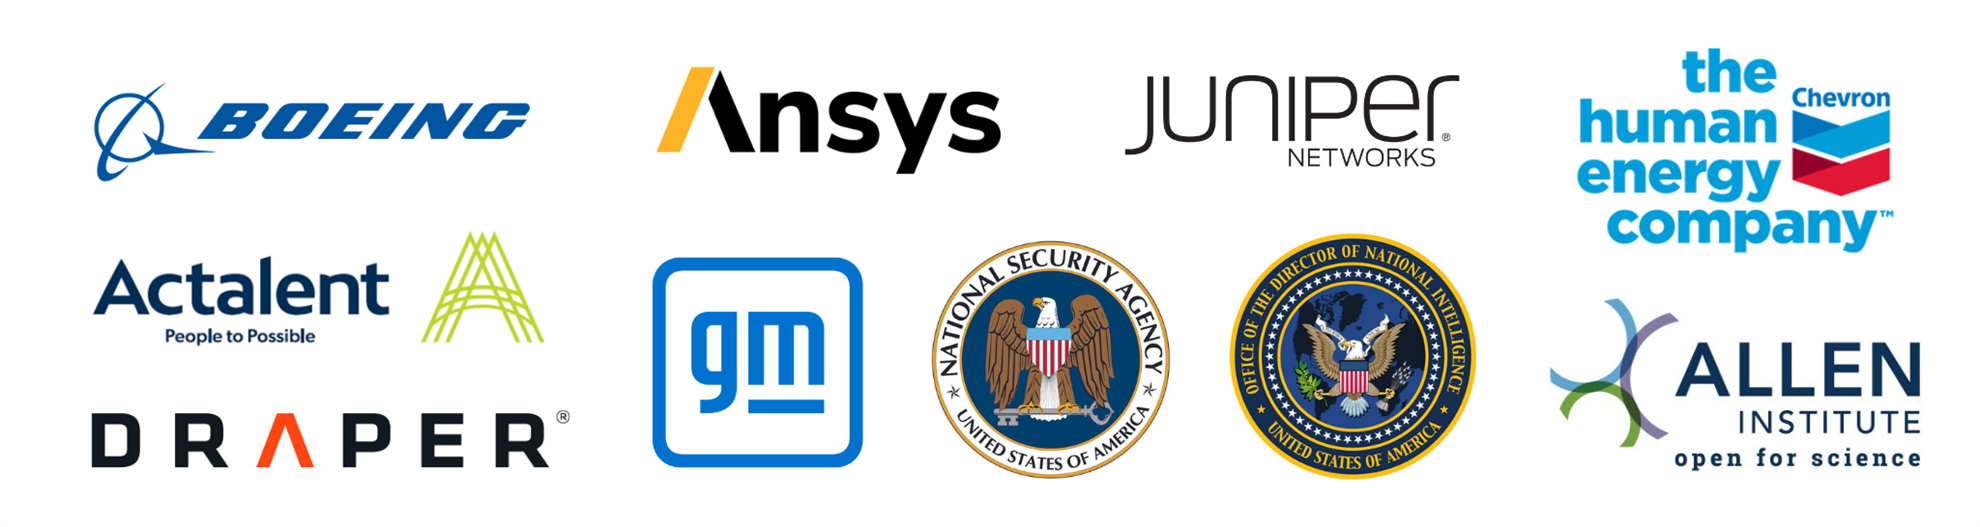 OAC Sponsors, which include: Ansys, Boeing, Chevron, Lockheed Martin, JP Morgan & Chase, Zebra, ODNI, Juniper Networks